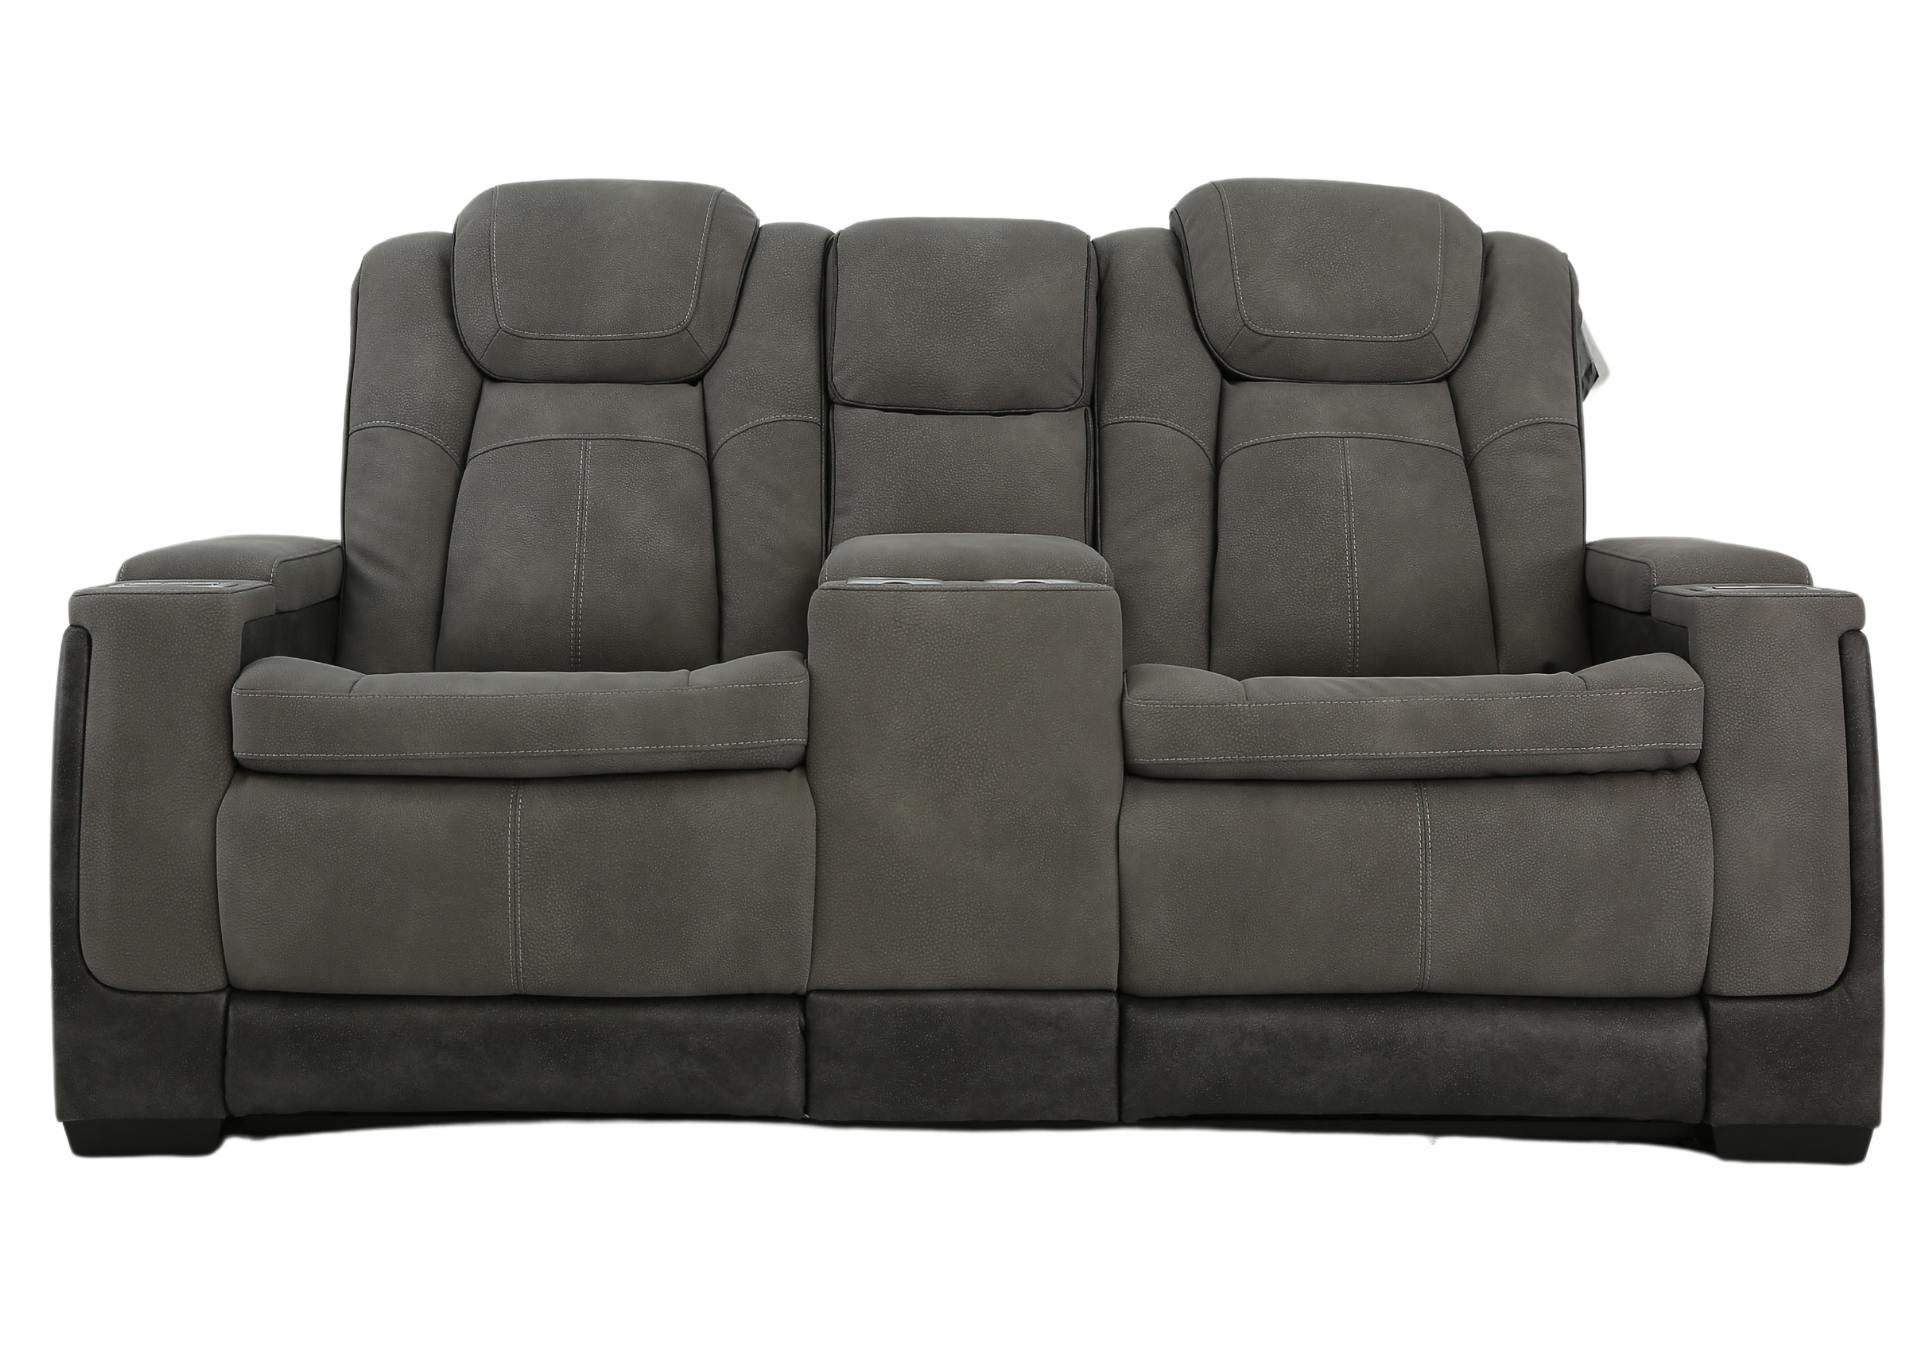 NEXT-GEN SLATE 2P POWER LOVESEAT WITH CONSOLE,ASHLEY FURNITURE INC.